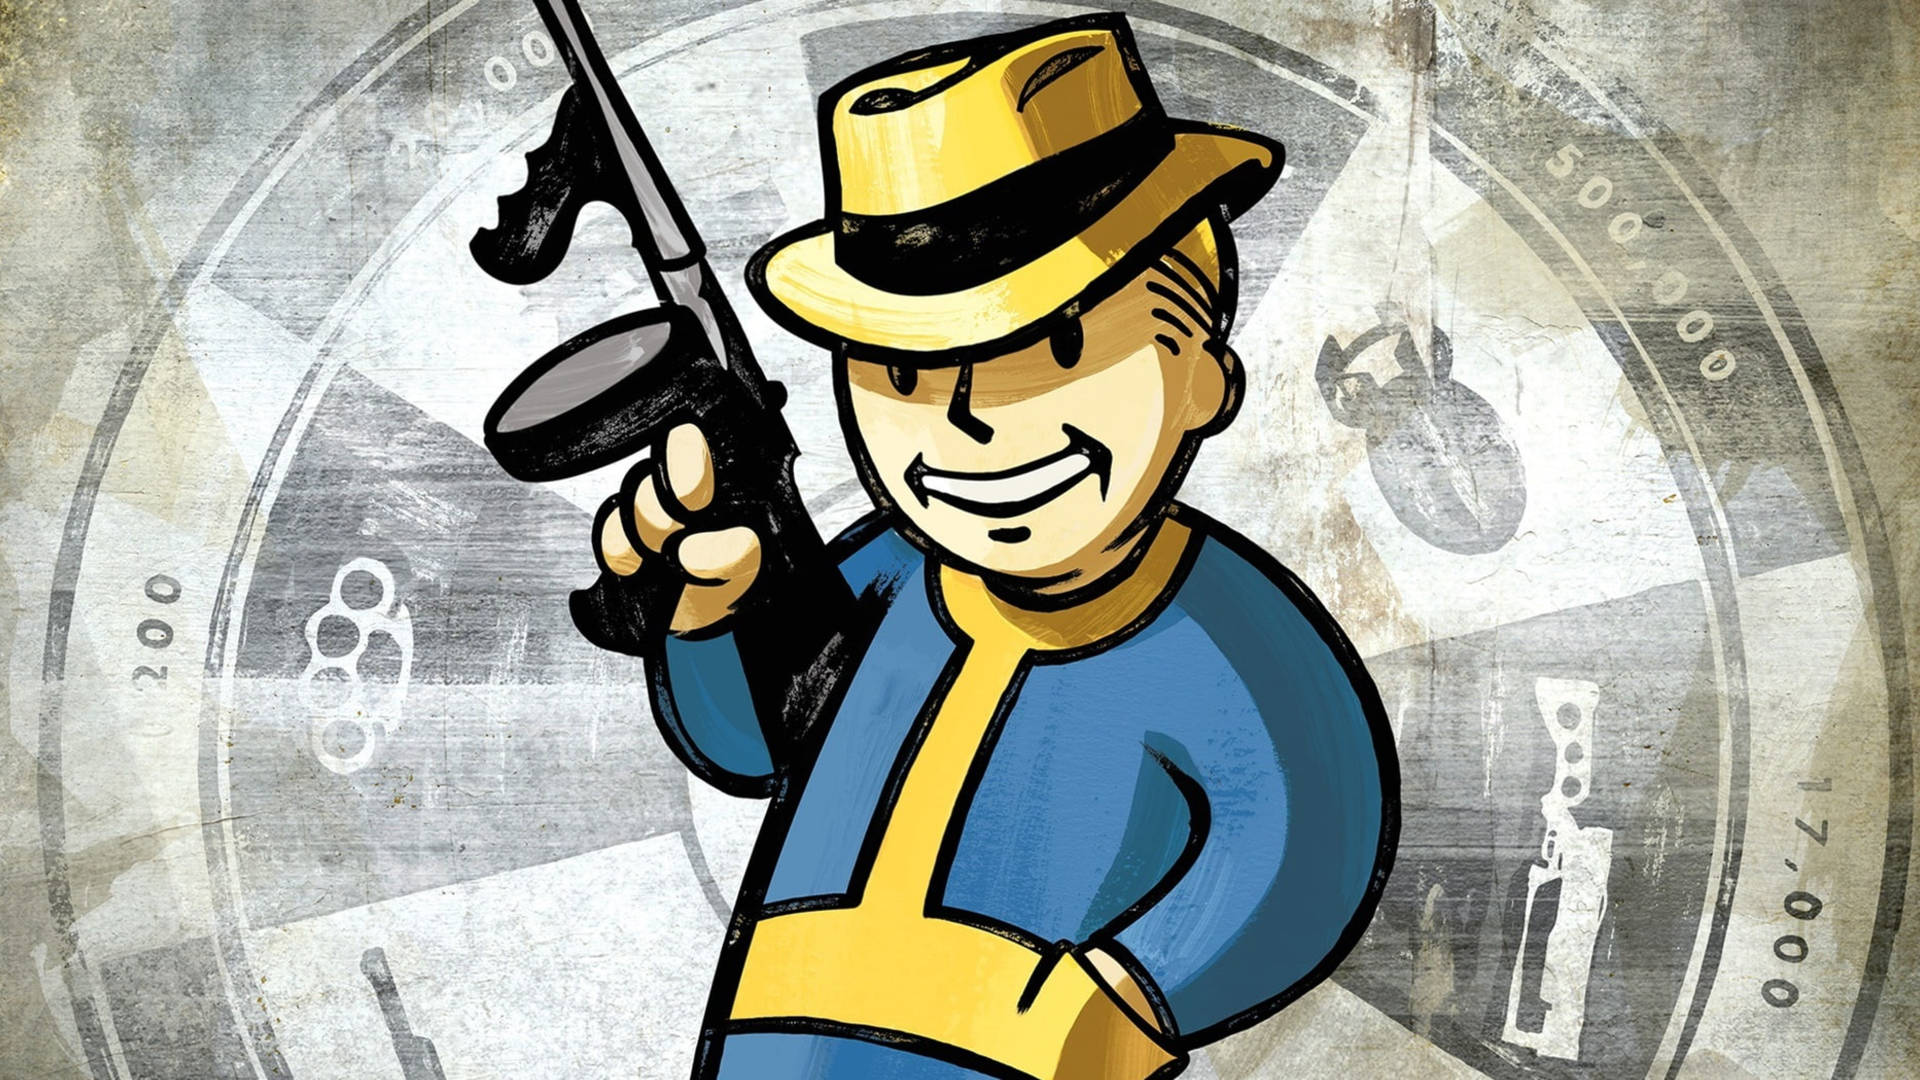 Colored Vault Boy Fallout 4 4k Background